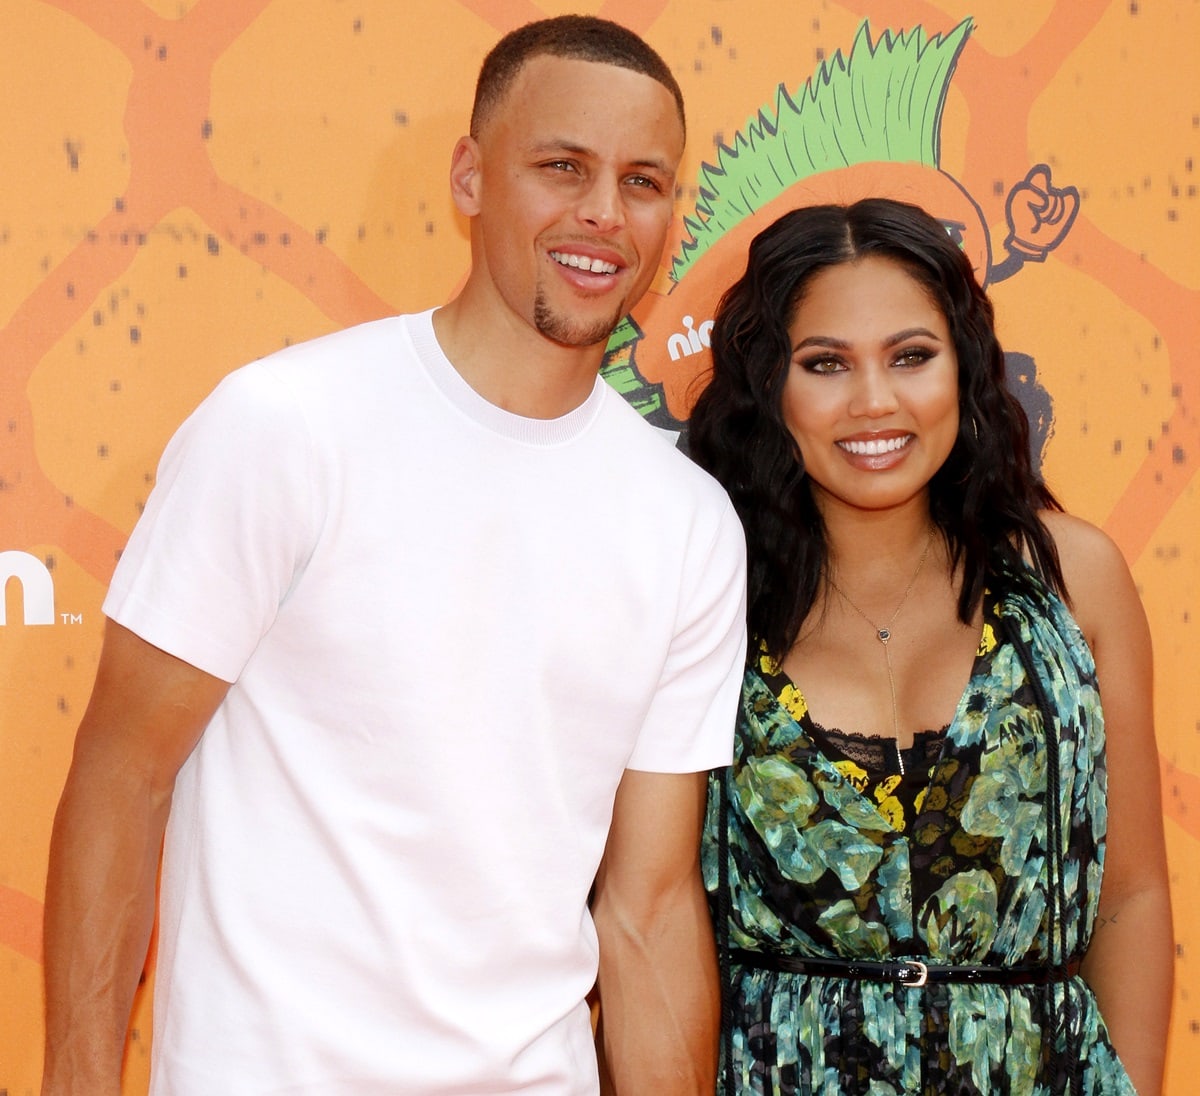 Ayesha Curry, the wife of Steph Curry, is a Canadian-born individual who describes herself as a "passionate dual citizen" of Canada and the United States, highlighting her strong connection to both countries